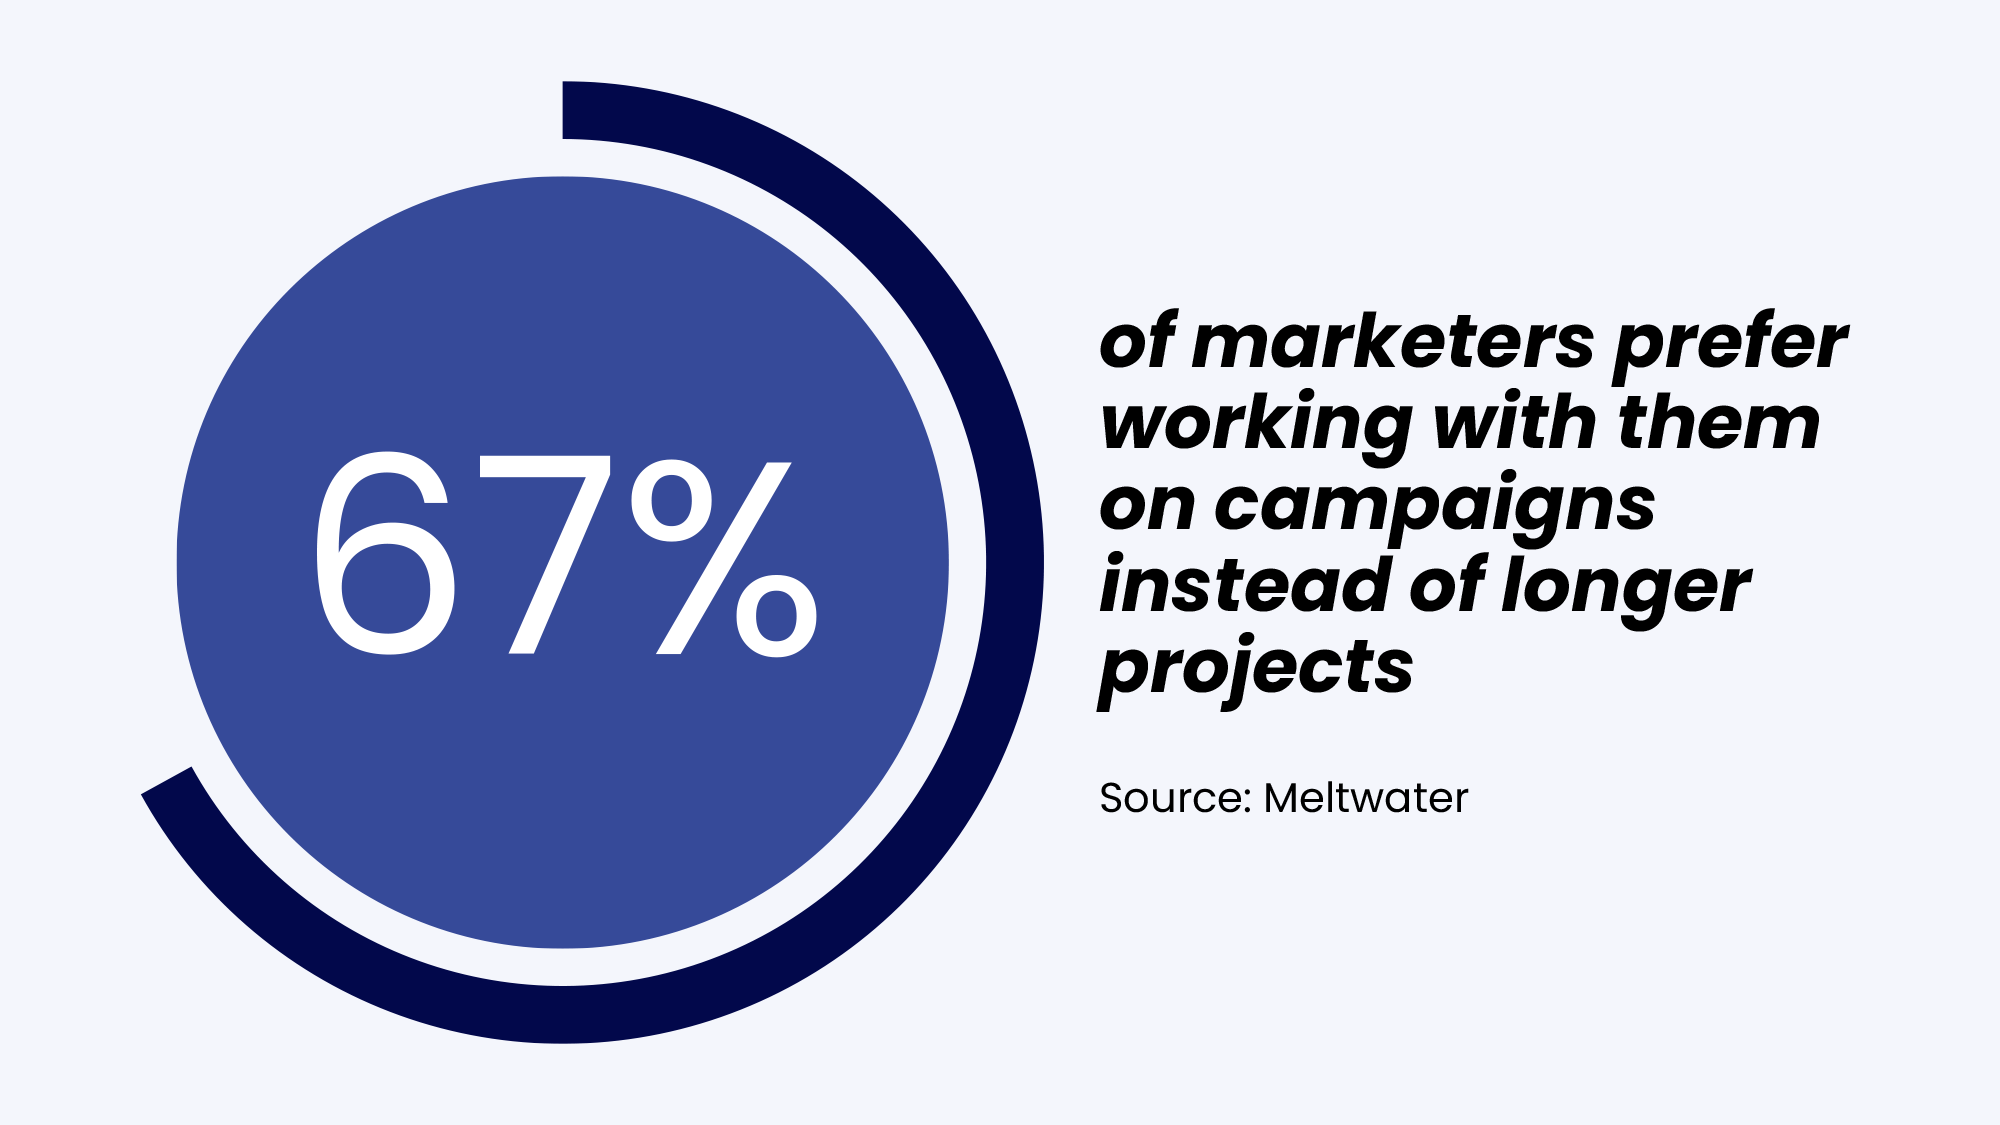 67% of marketers prefer working with them on campaigns instead of longer projects